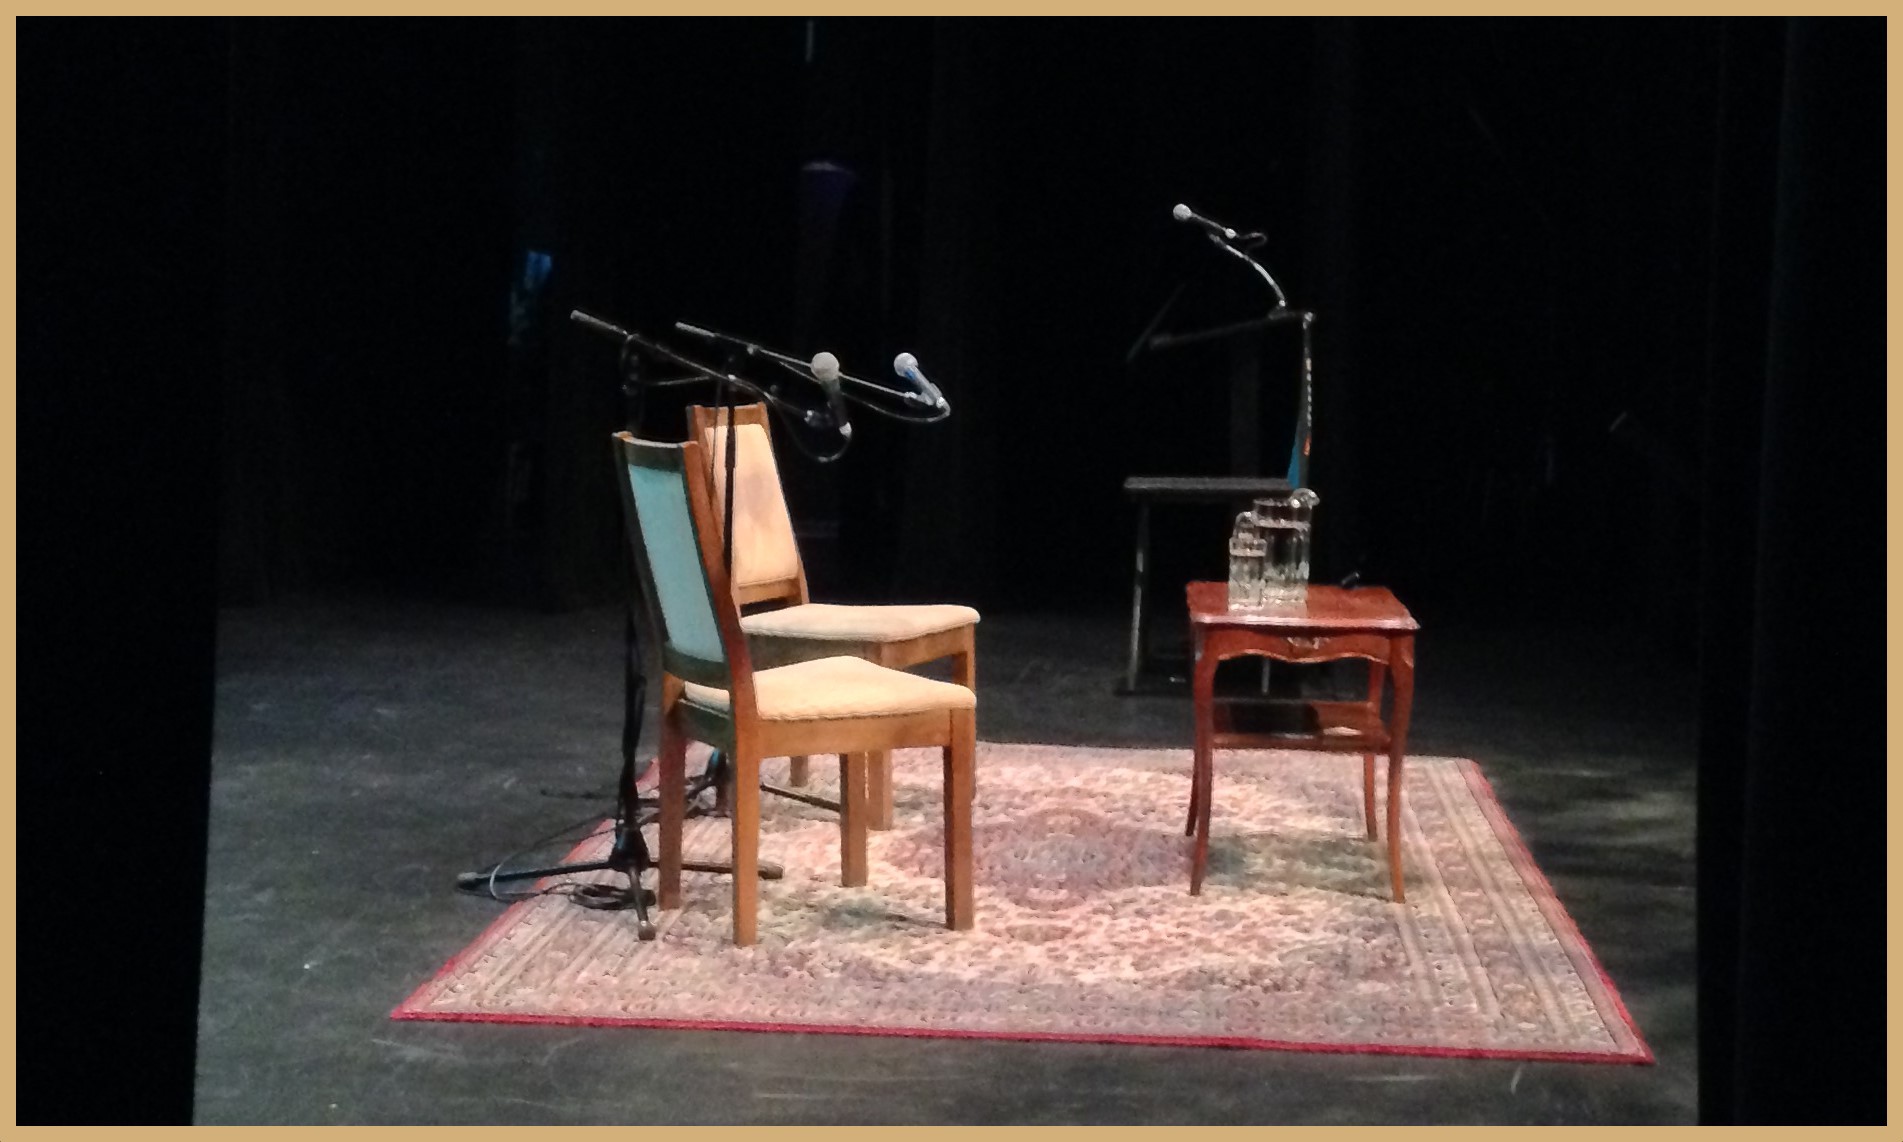 Writers Fest stage, empty chairs with mics